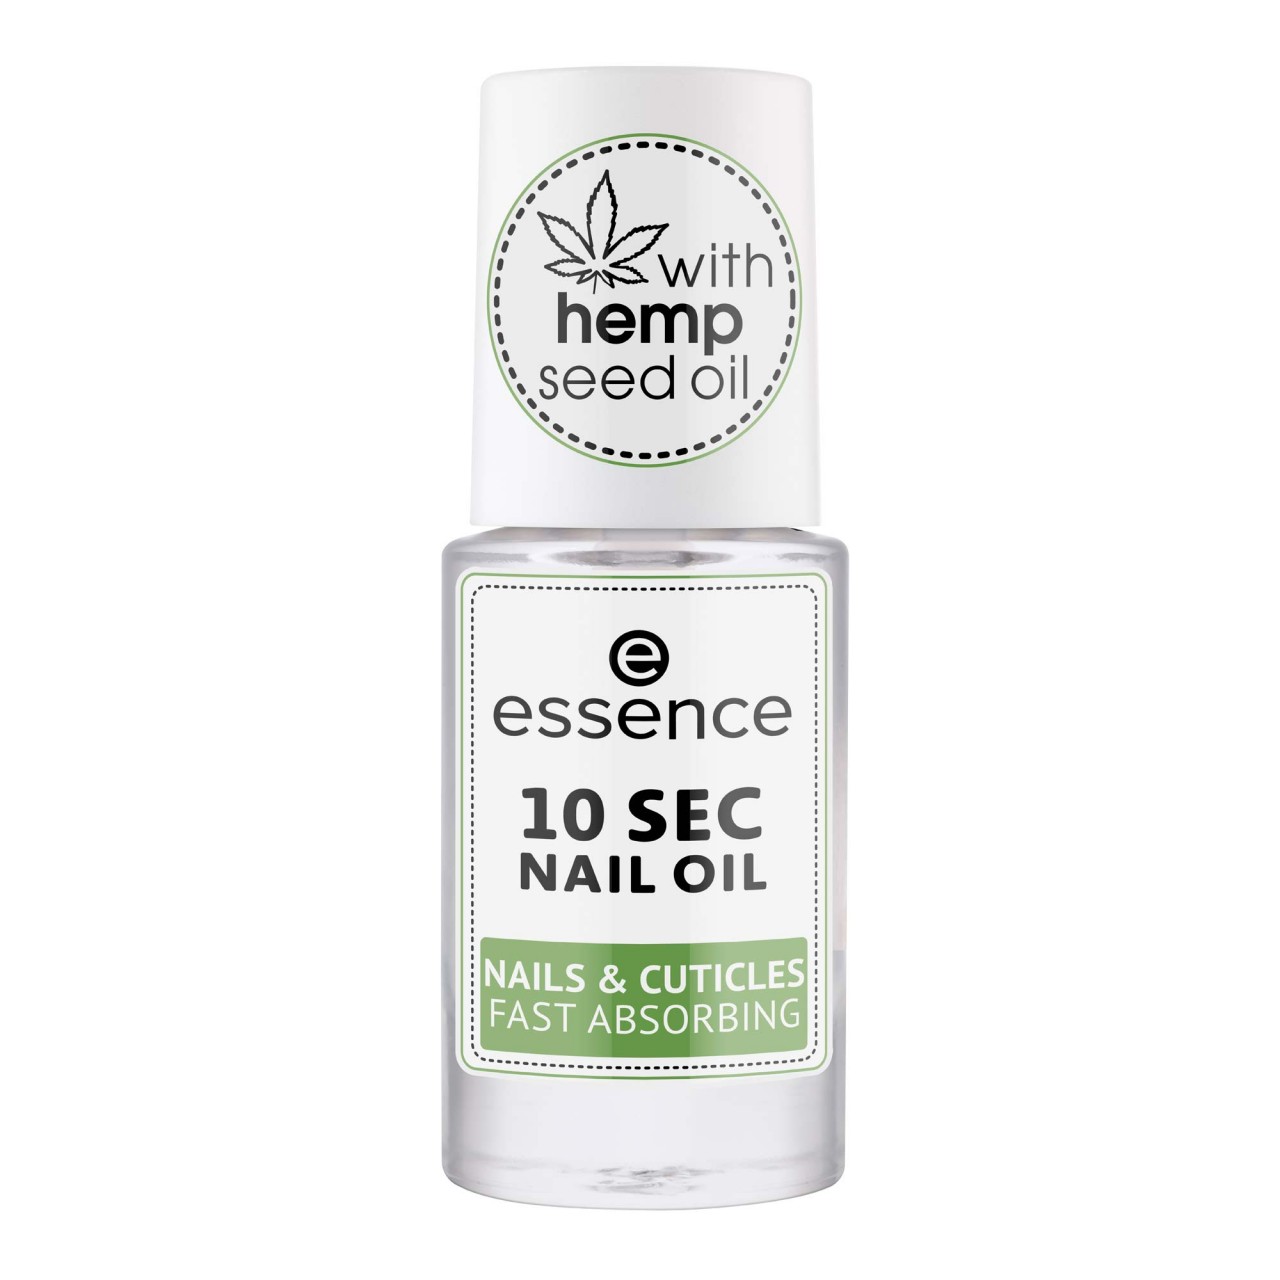 ESSENCE - 10 Seconds Nail Oil & Cuticles - 